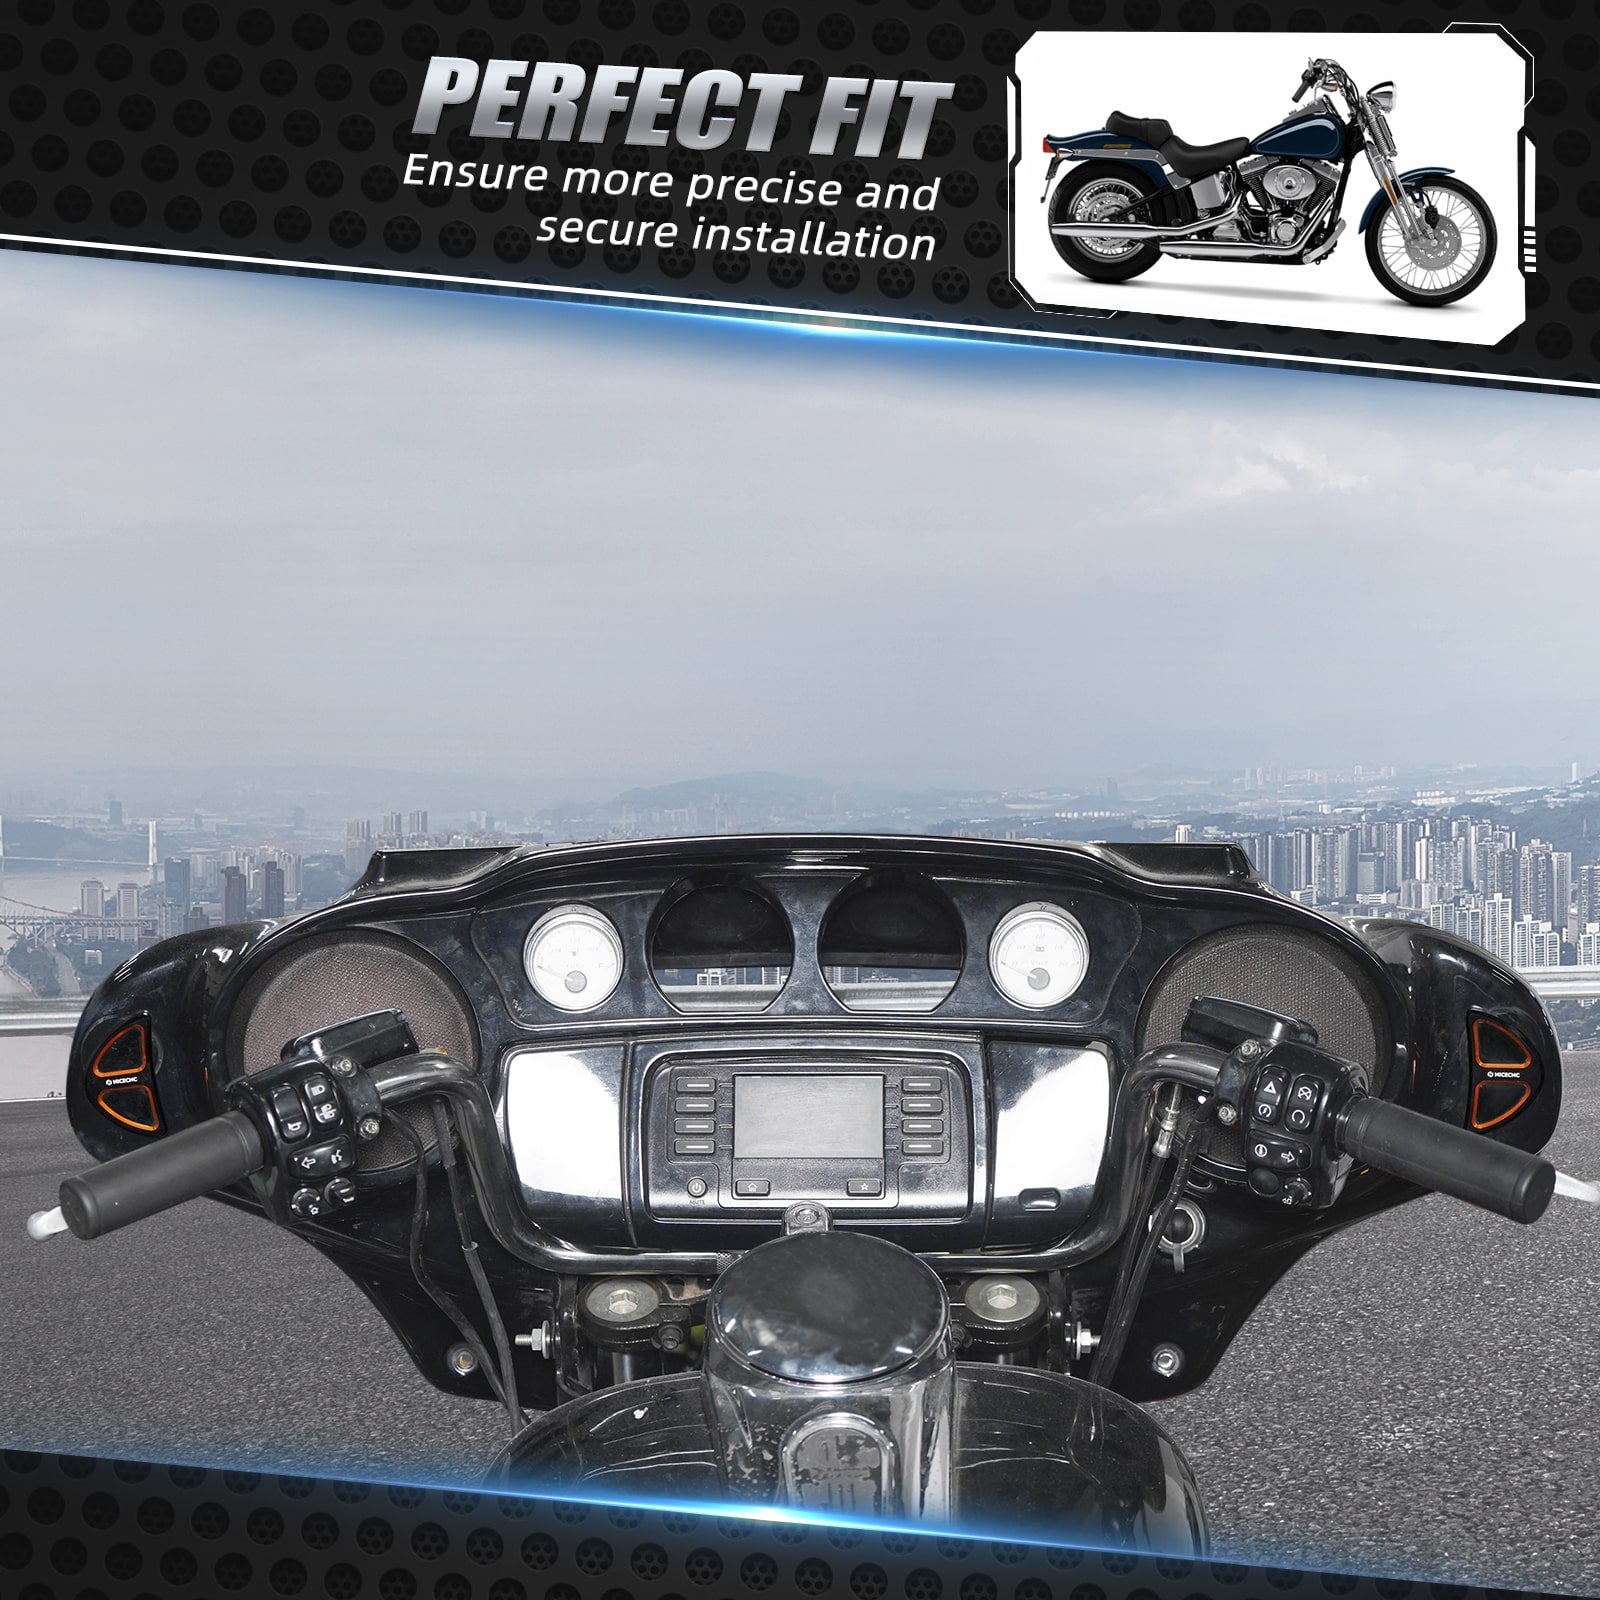 Fairing Mirror Hole Plugs Covers for Harley Street Glide FLHX